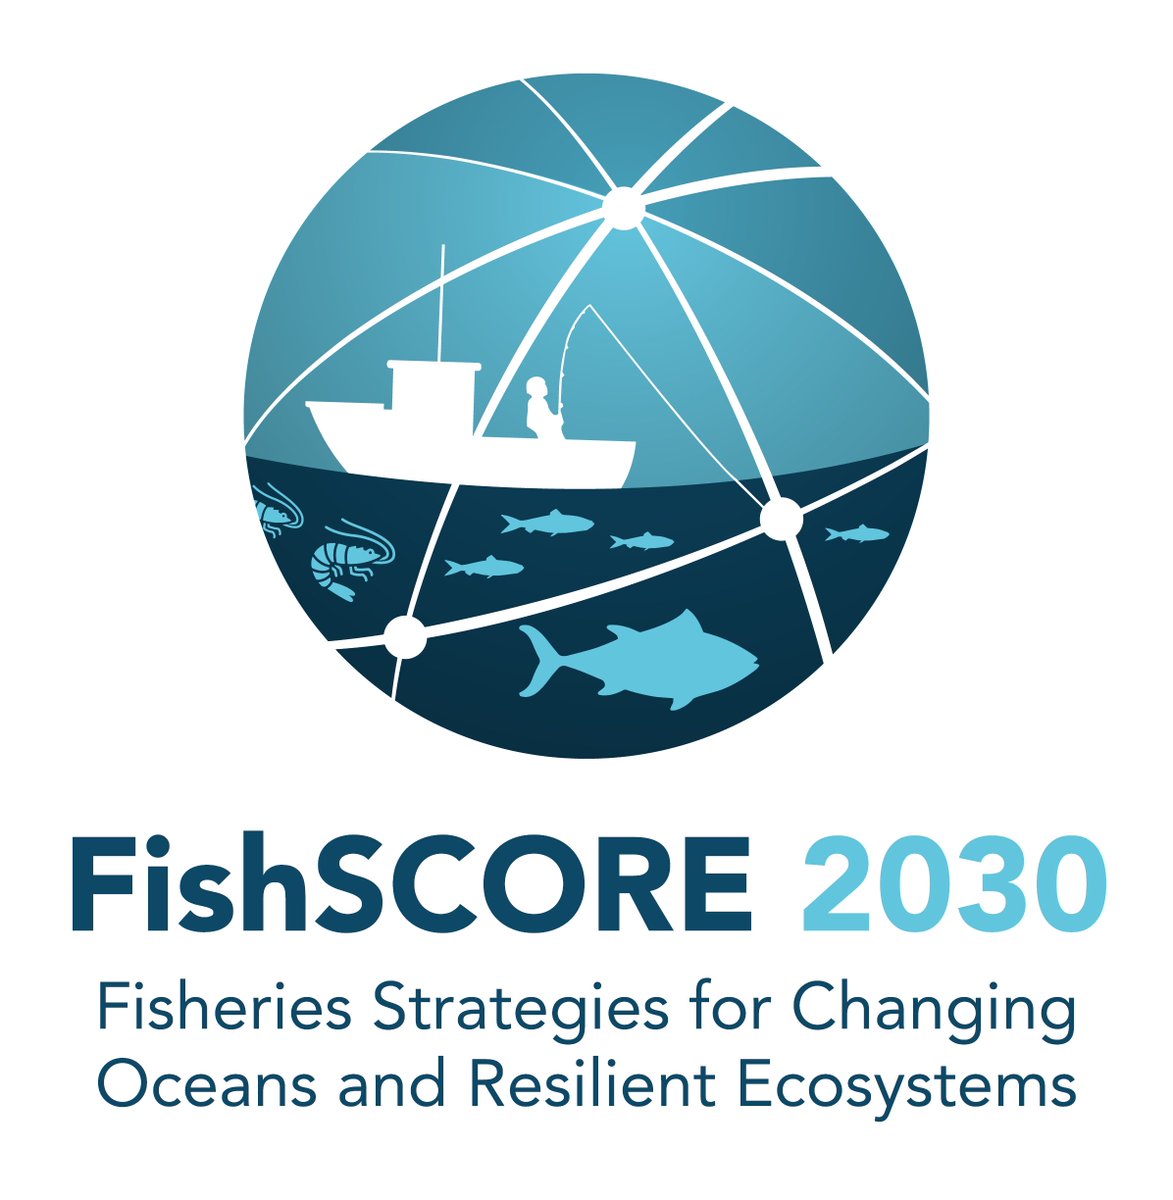 Kick-off webinar! Join us to learn more about @FishSCORE, its planned initiatives, aligned projects through the @UNoceandecade & opportunities to engage! Open to all! Two time zone options. Register here: 1. gmri.org/events/fishsco… 2. gmri.org/events/fishsco… #FishSCORE2030